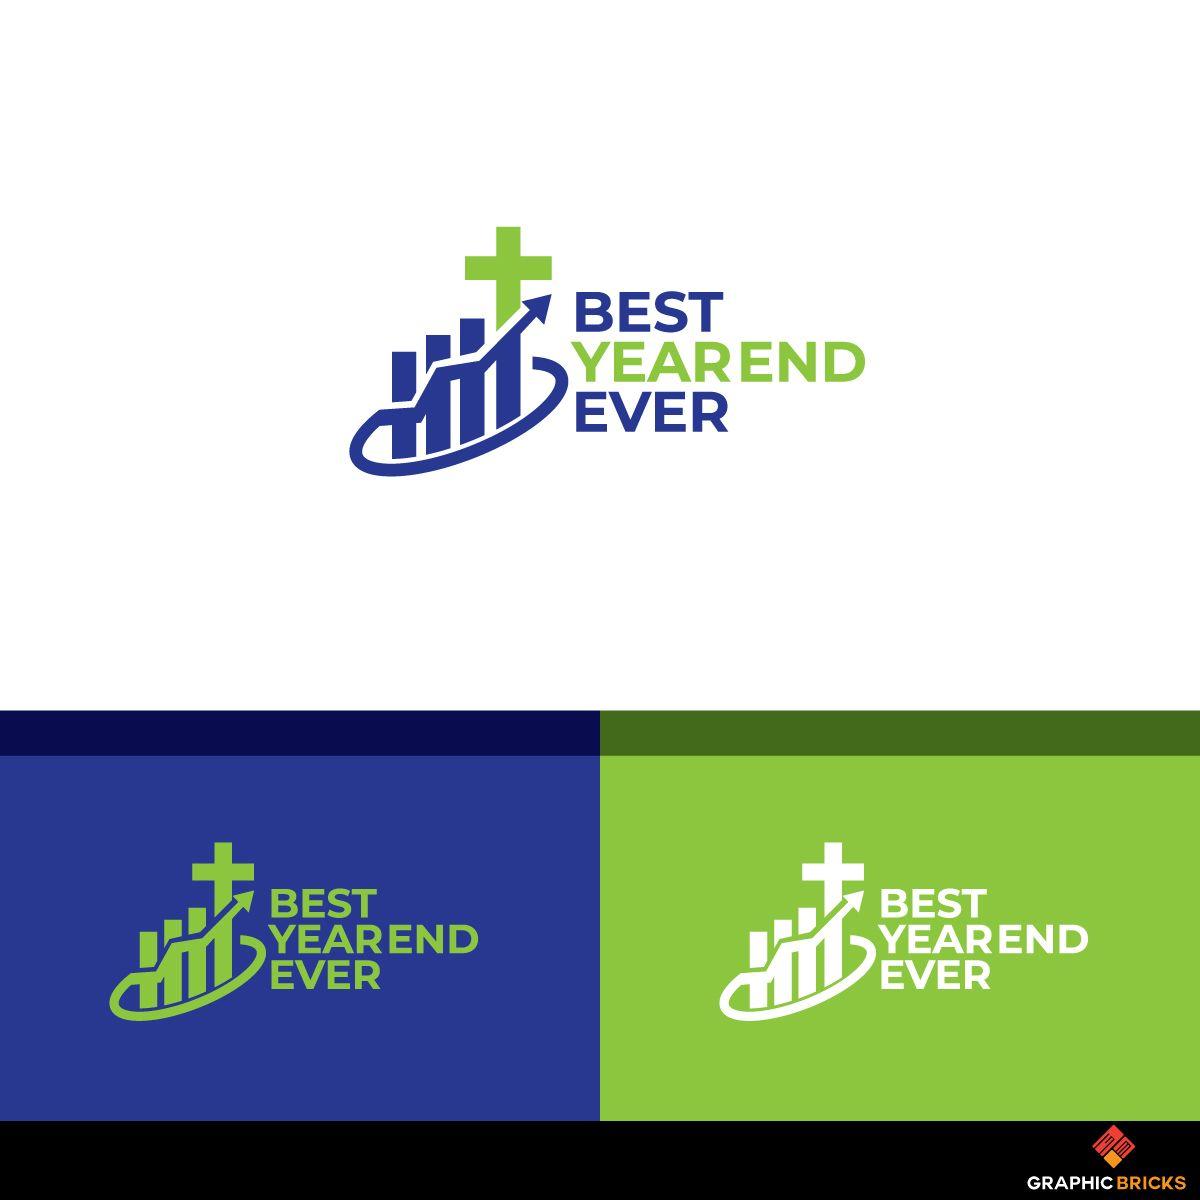 Best Ever Company Logo - Logo Design for Best Year End Ever by Graphic Bricks. Design